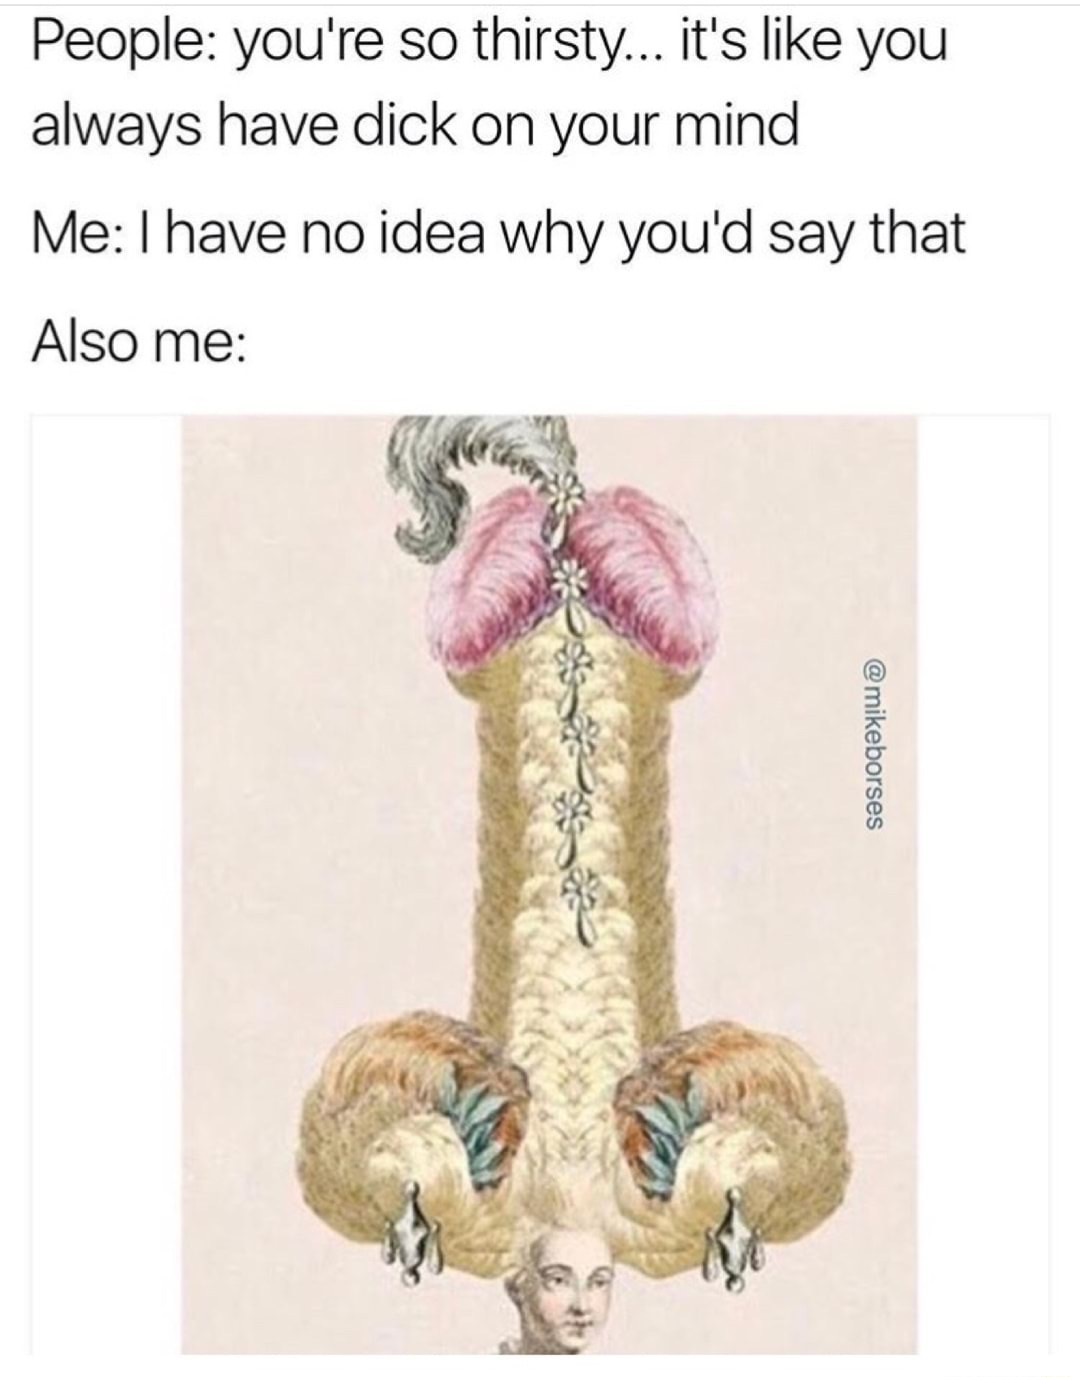 memes - classical art meme penis - People you're so thirsty... it's you always have dick on your mind Me I have no idea why you'd say that Also me